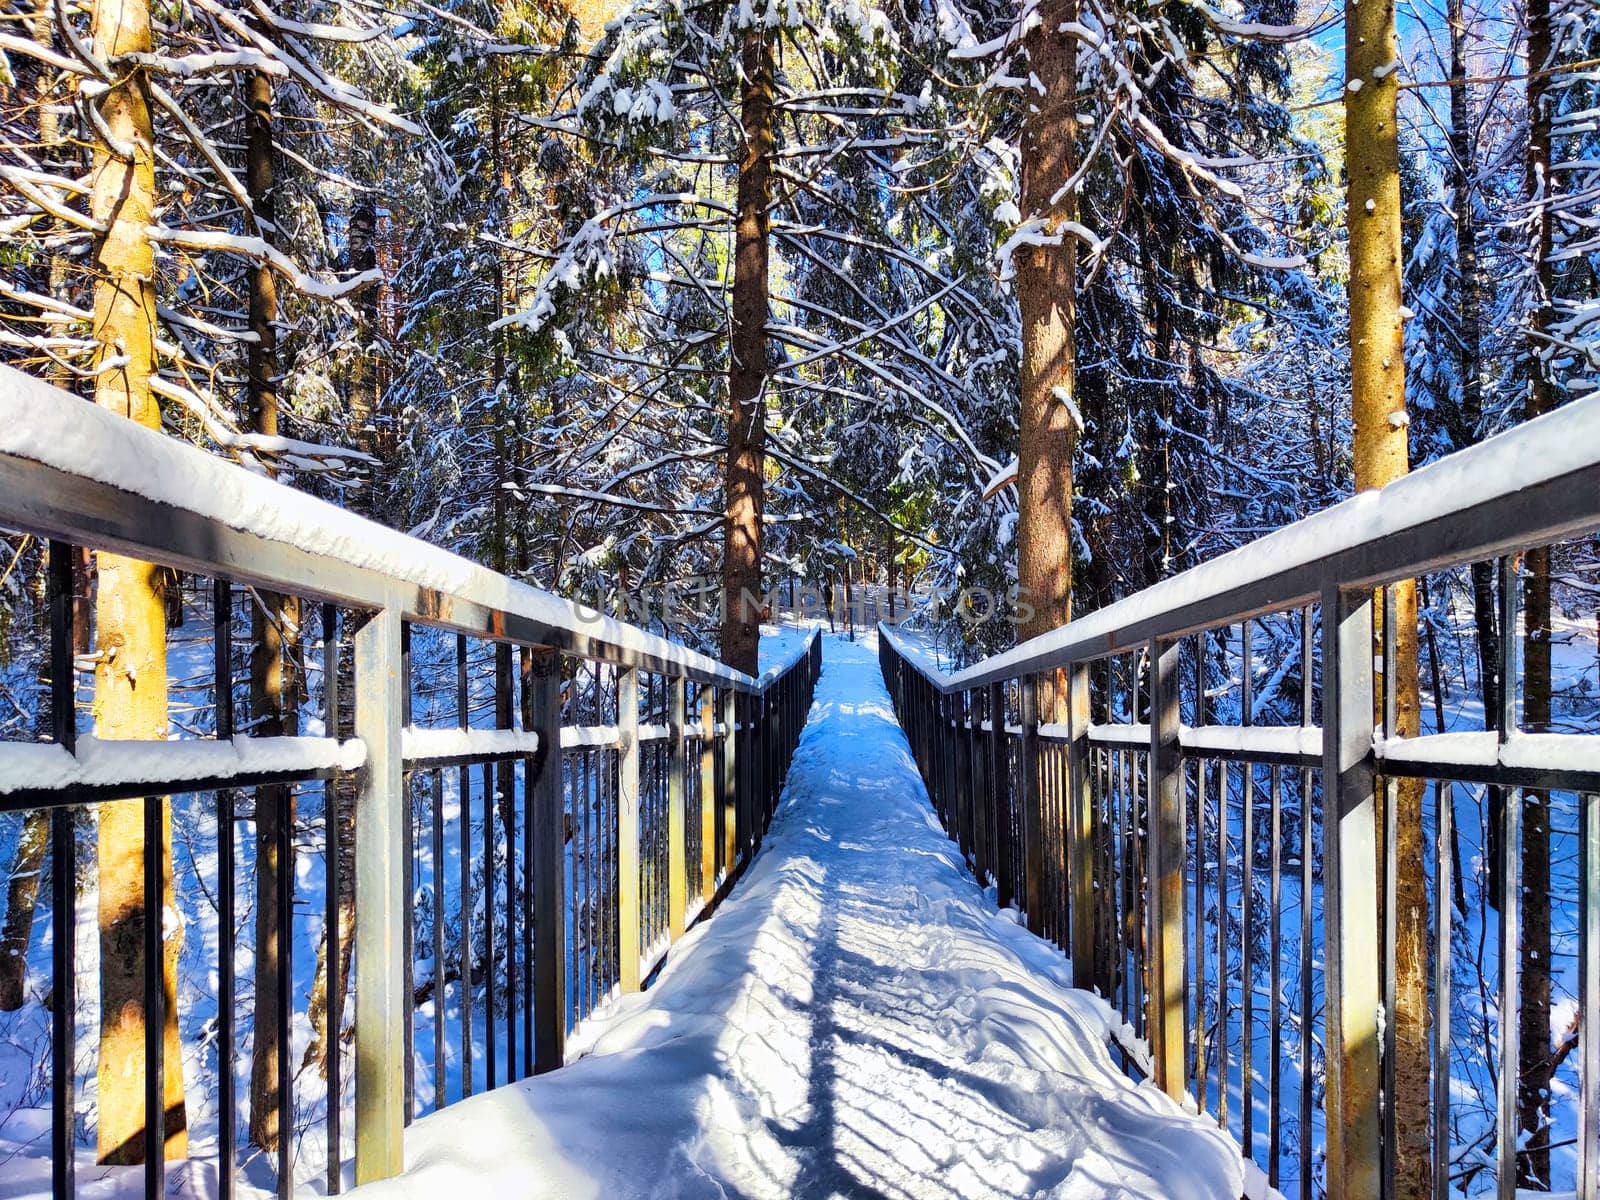 Snow-Covered Bridge in a Pine Forest on a Sunny Winter Day. A bridge blanketed with snow winds through a pine forest under clear blue sky